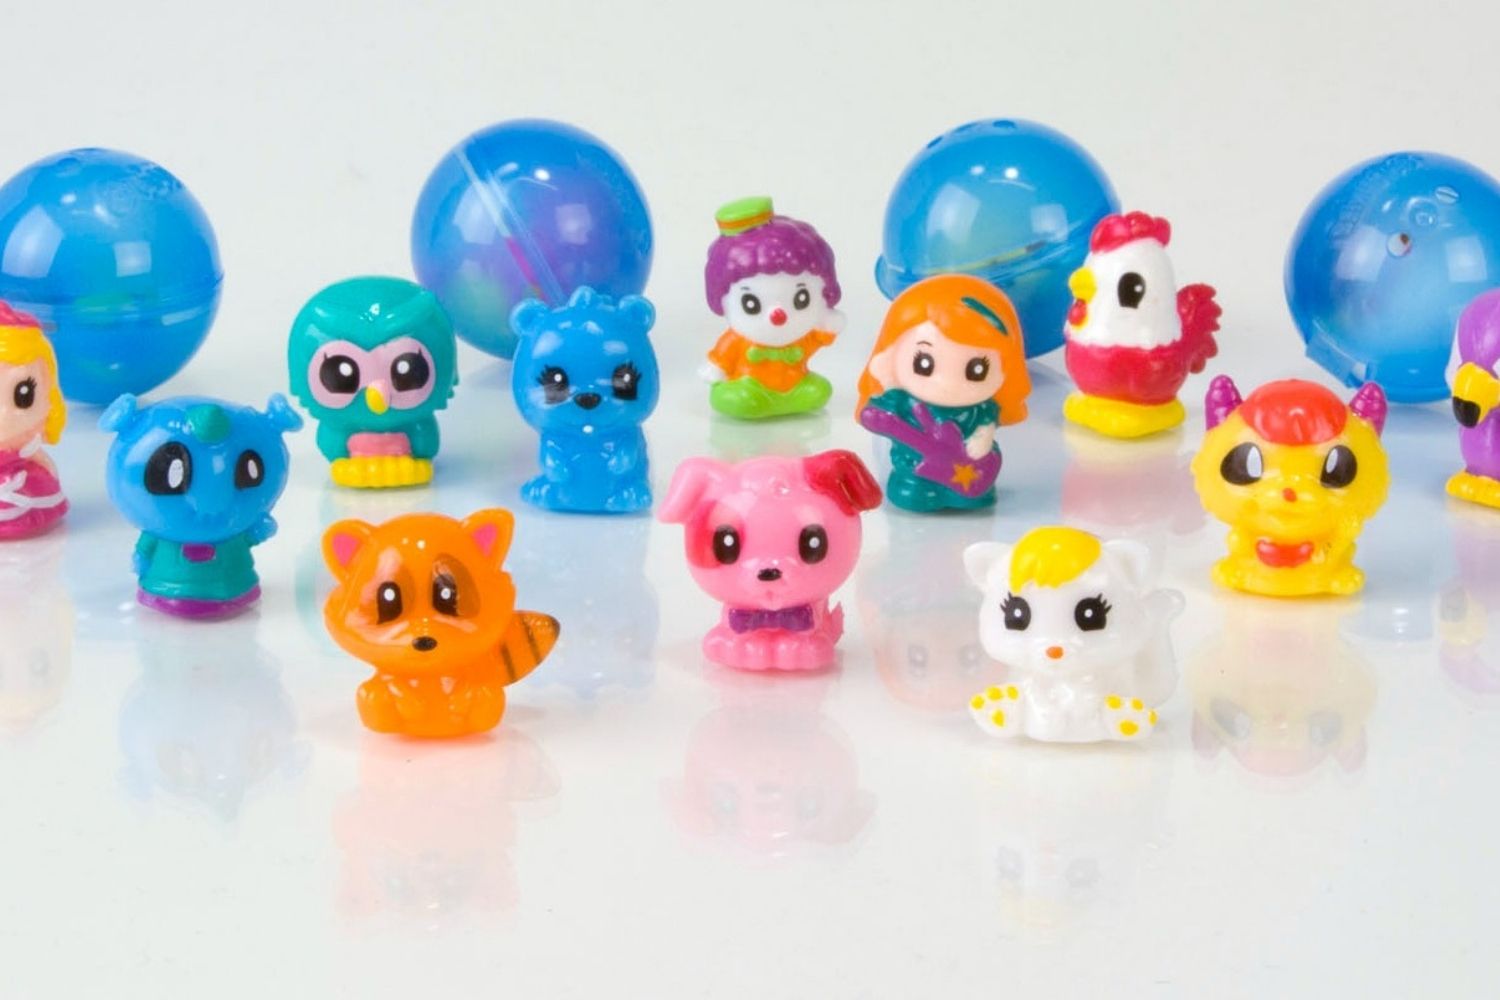 The New Kid Craze: A Tiny, Squishy Toy in a Plastic Bubble